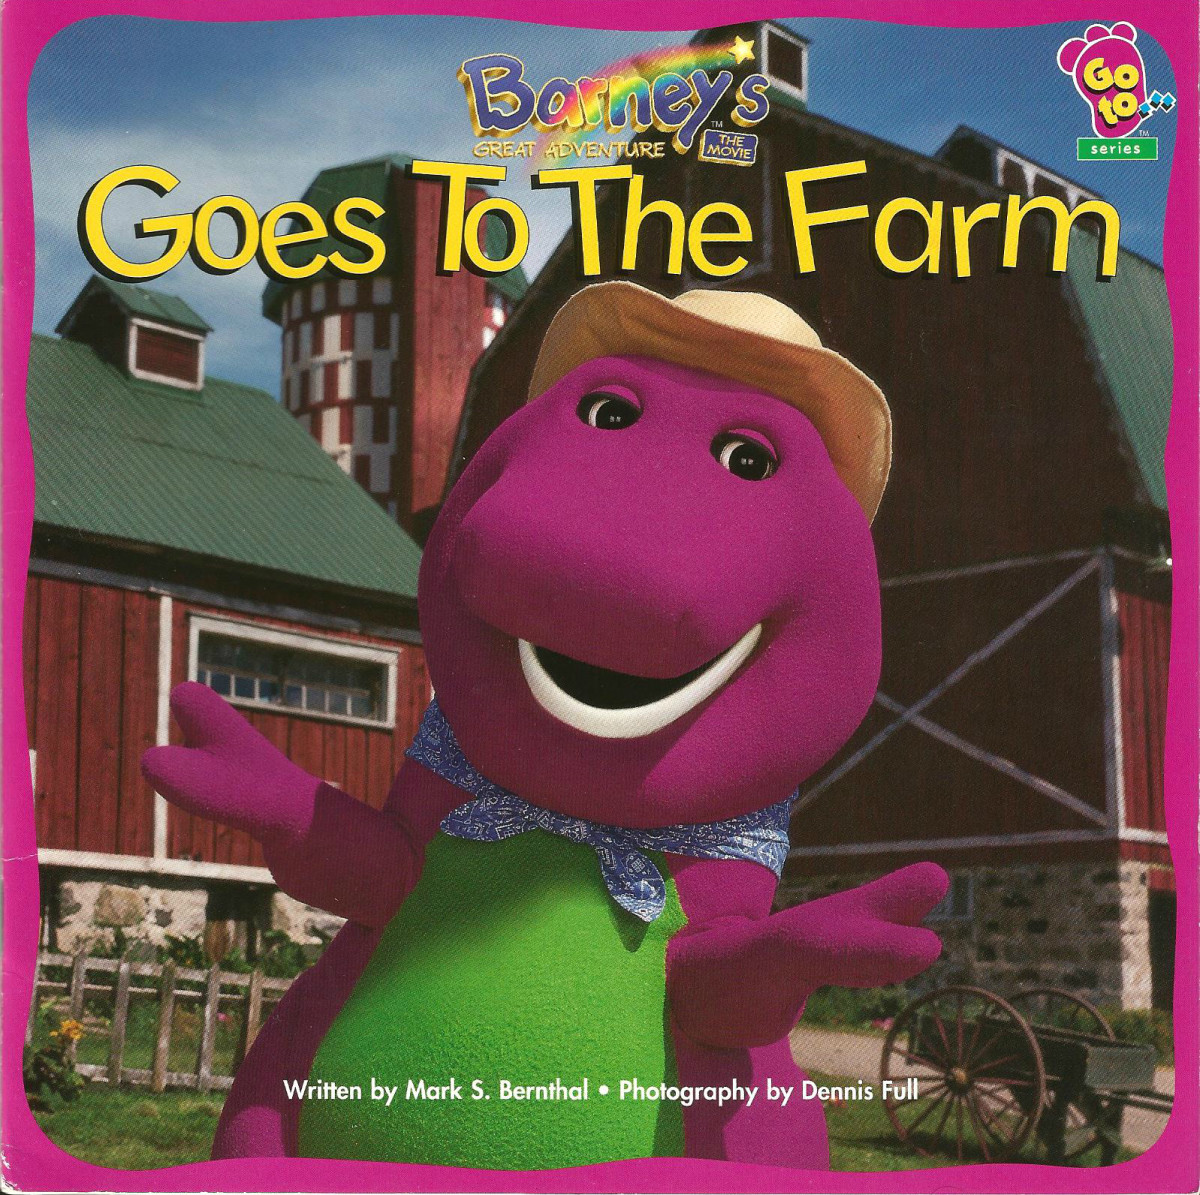 Reading Barney Books to Children, A Great way to Grow a Child's Imagination